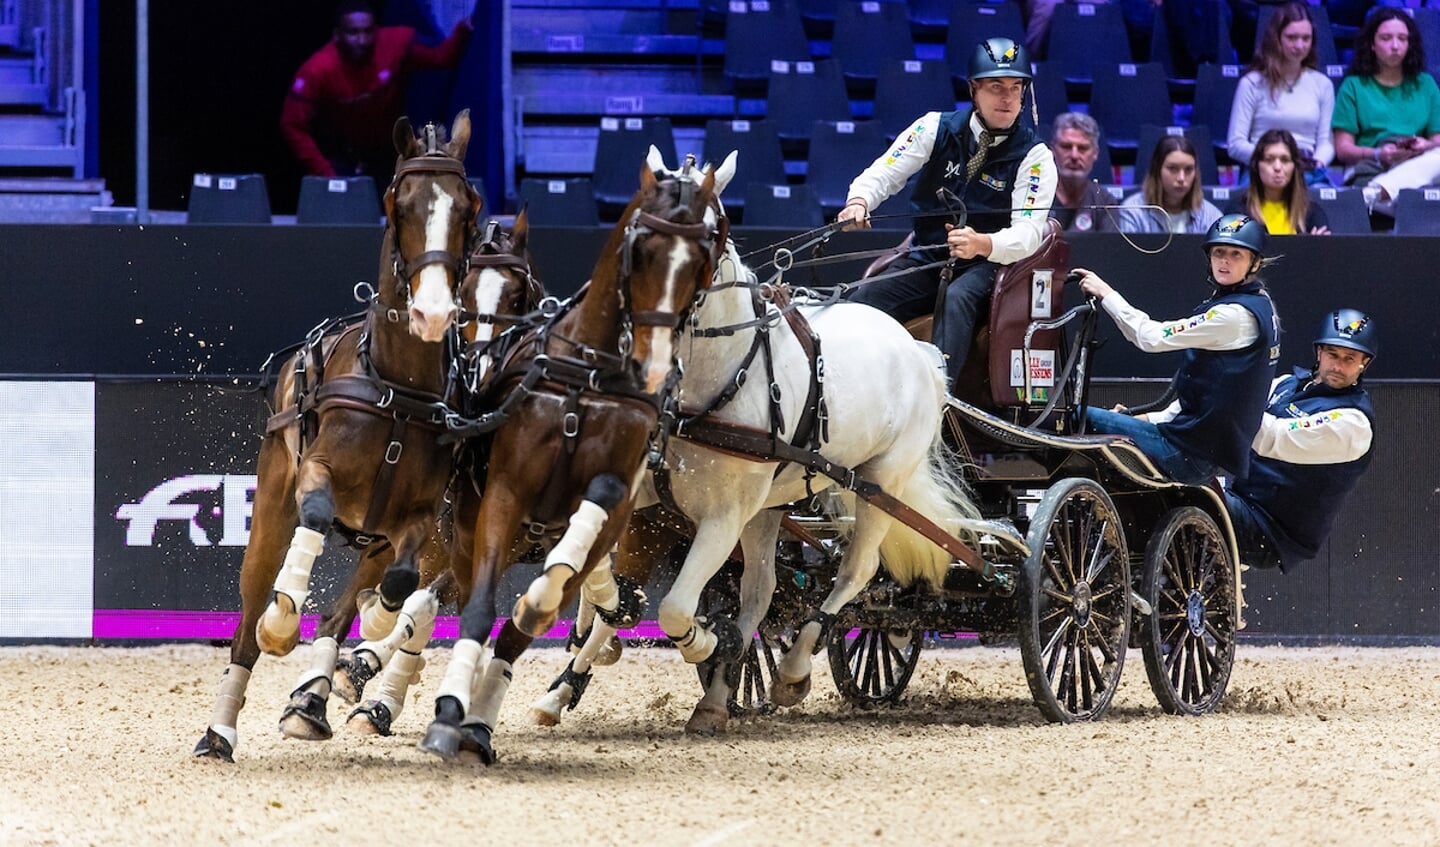 Dries Degrieck (BEL) with on the carriage Anne Boterberg and Frederic de Bruyne
Horses 2A Hunter, 2B Incitato XV-30, 2C Kane B, 2D Leon
FEI Driving World Cup Lyon 2022
© DigiShots